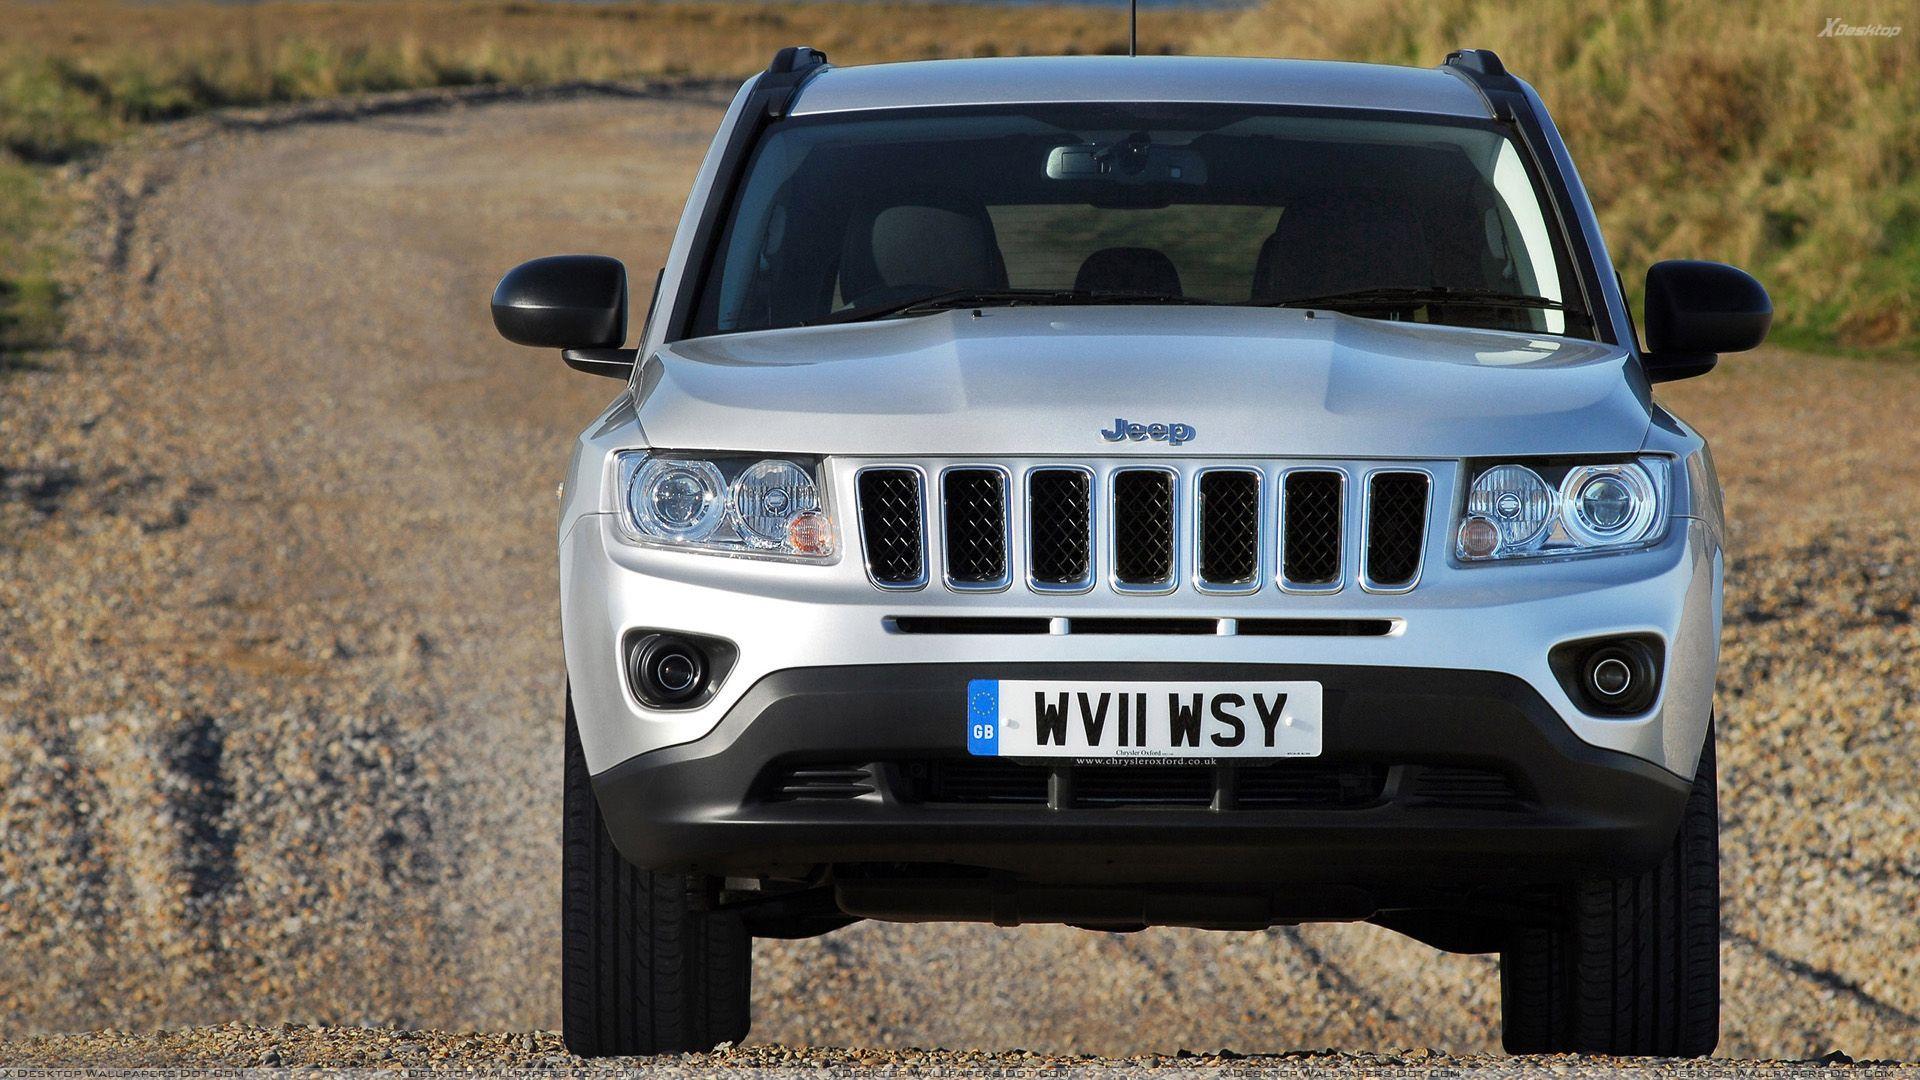 Jeep Compass Wallpaper, Photo & Image in HD